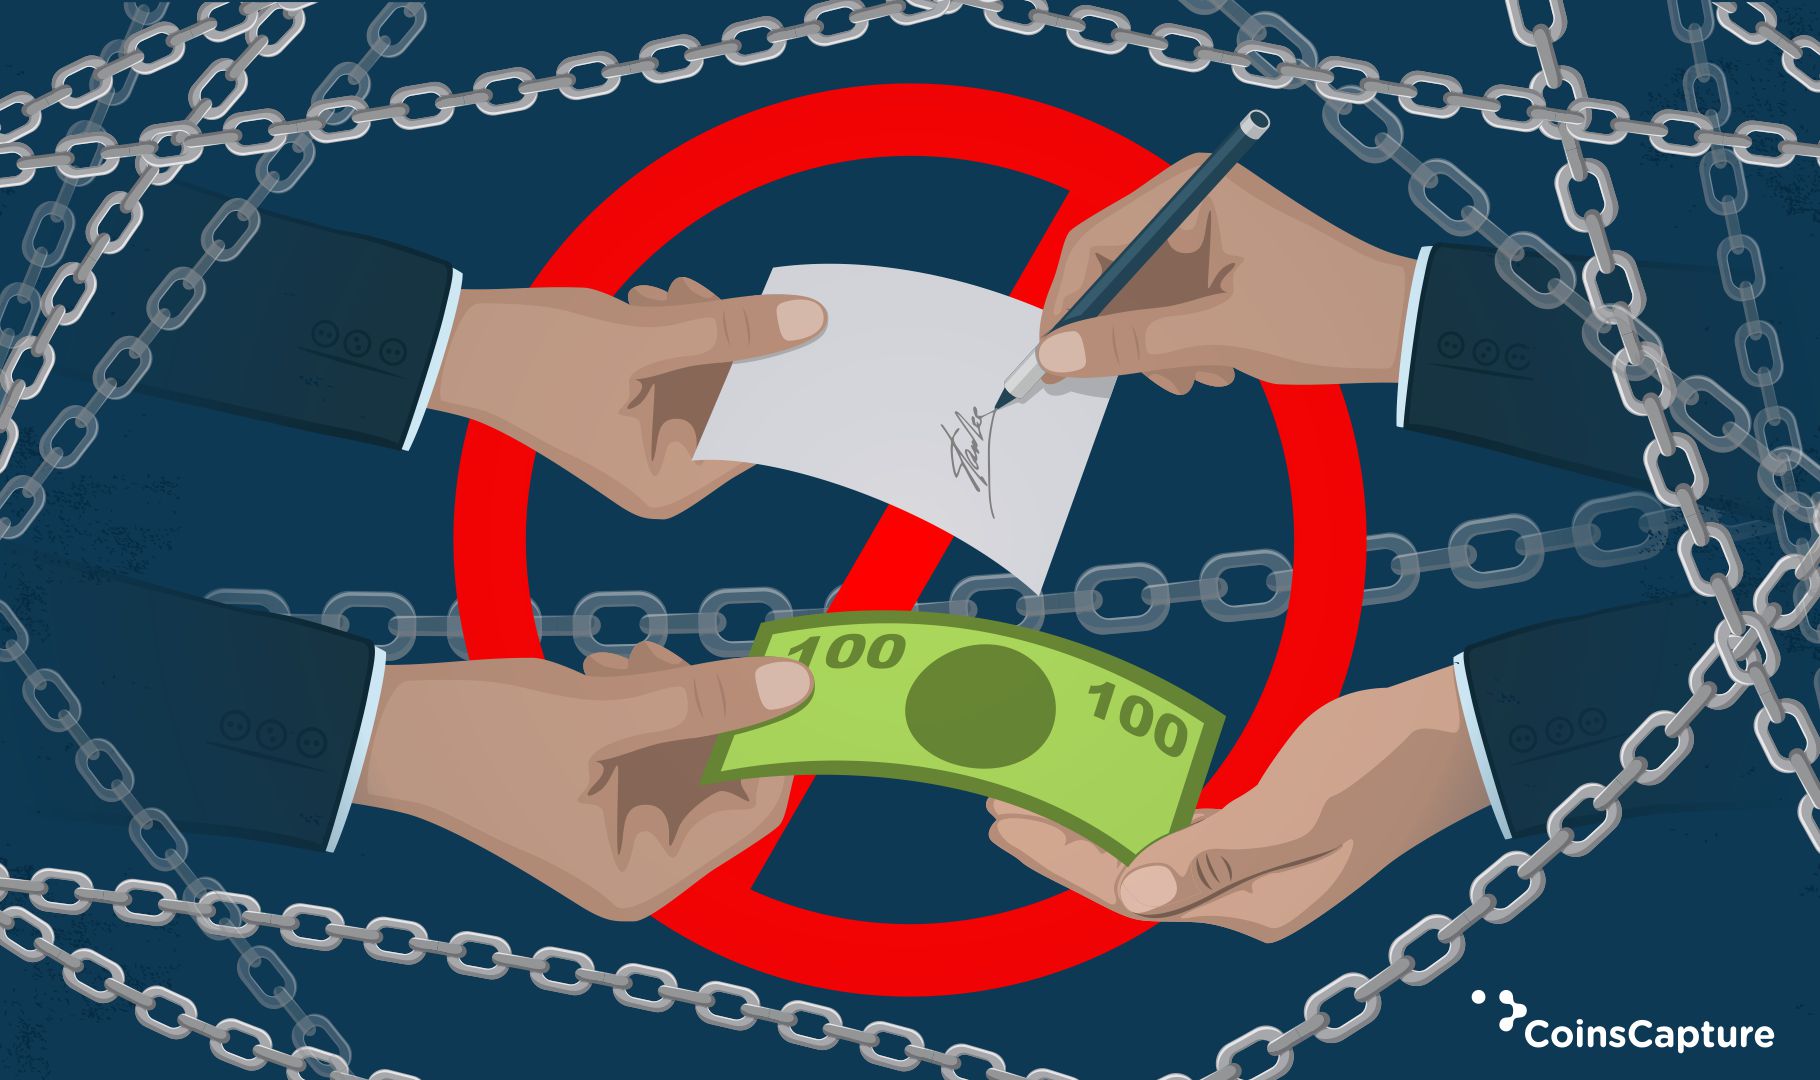 How Does Blockchain Technology Stand As An Anti-Corruption Tool?